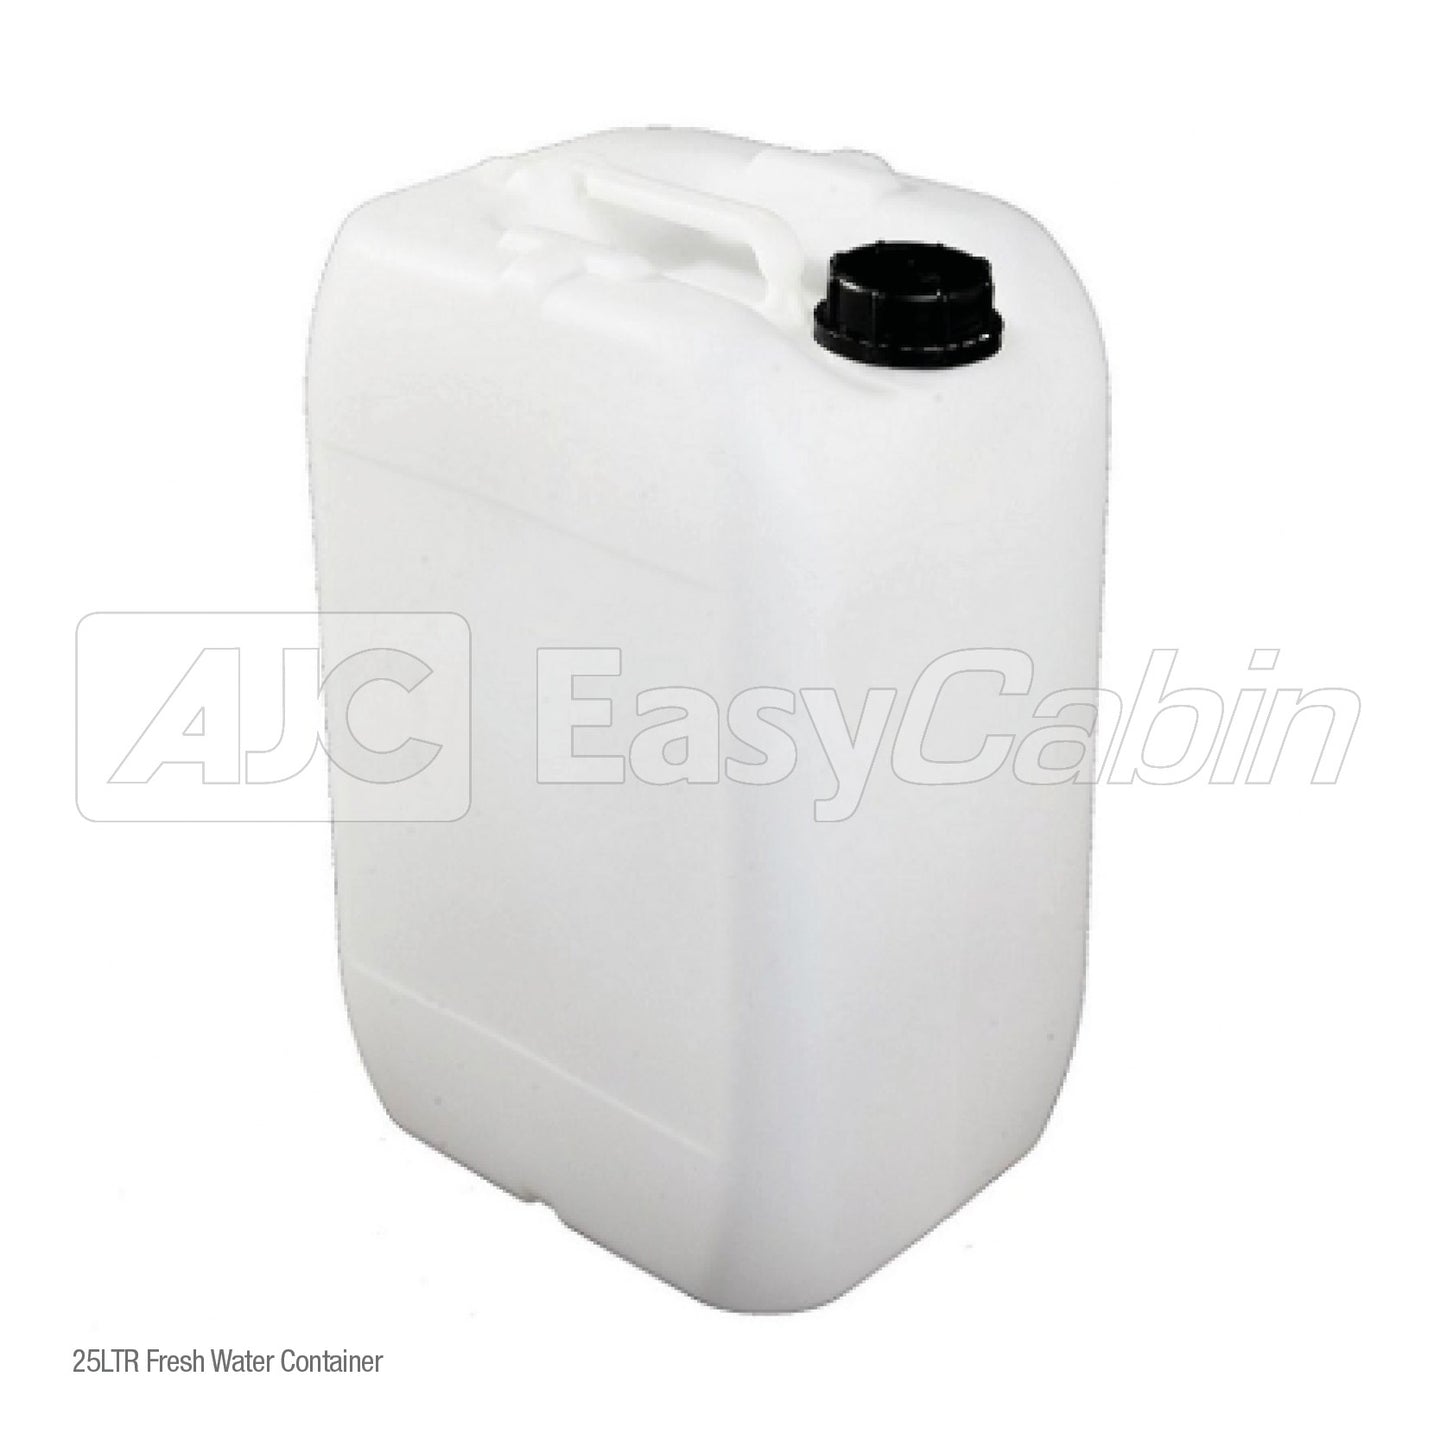 25Ltr Fresh Water Container